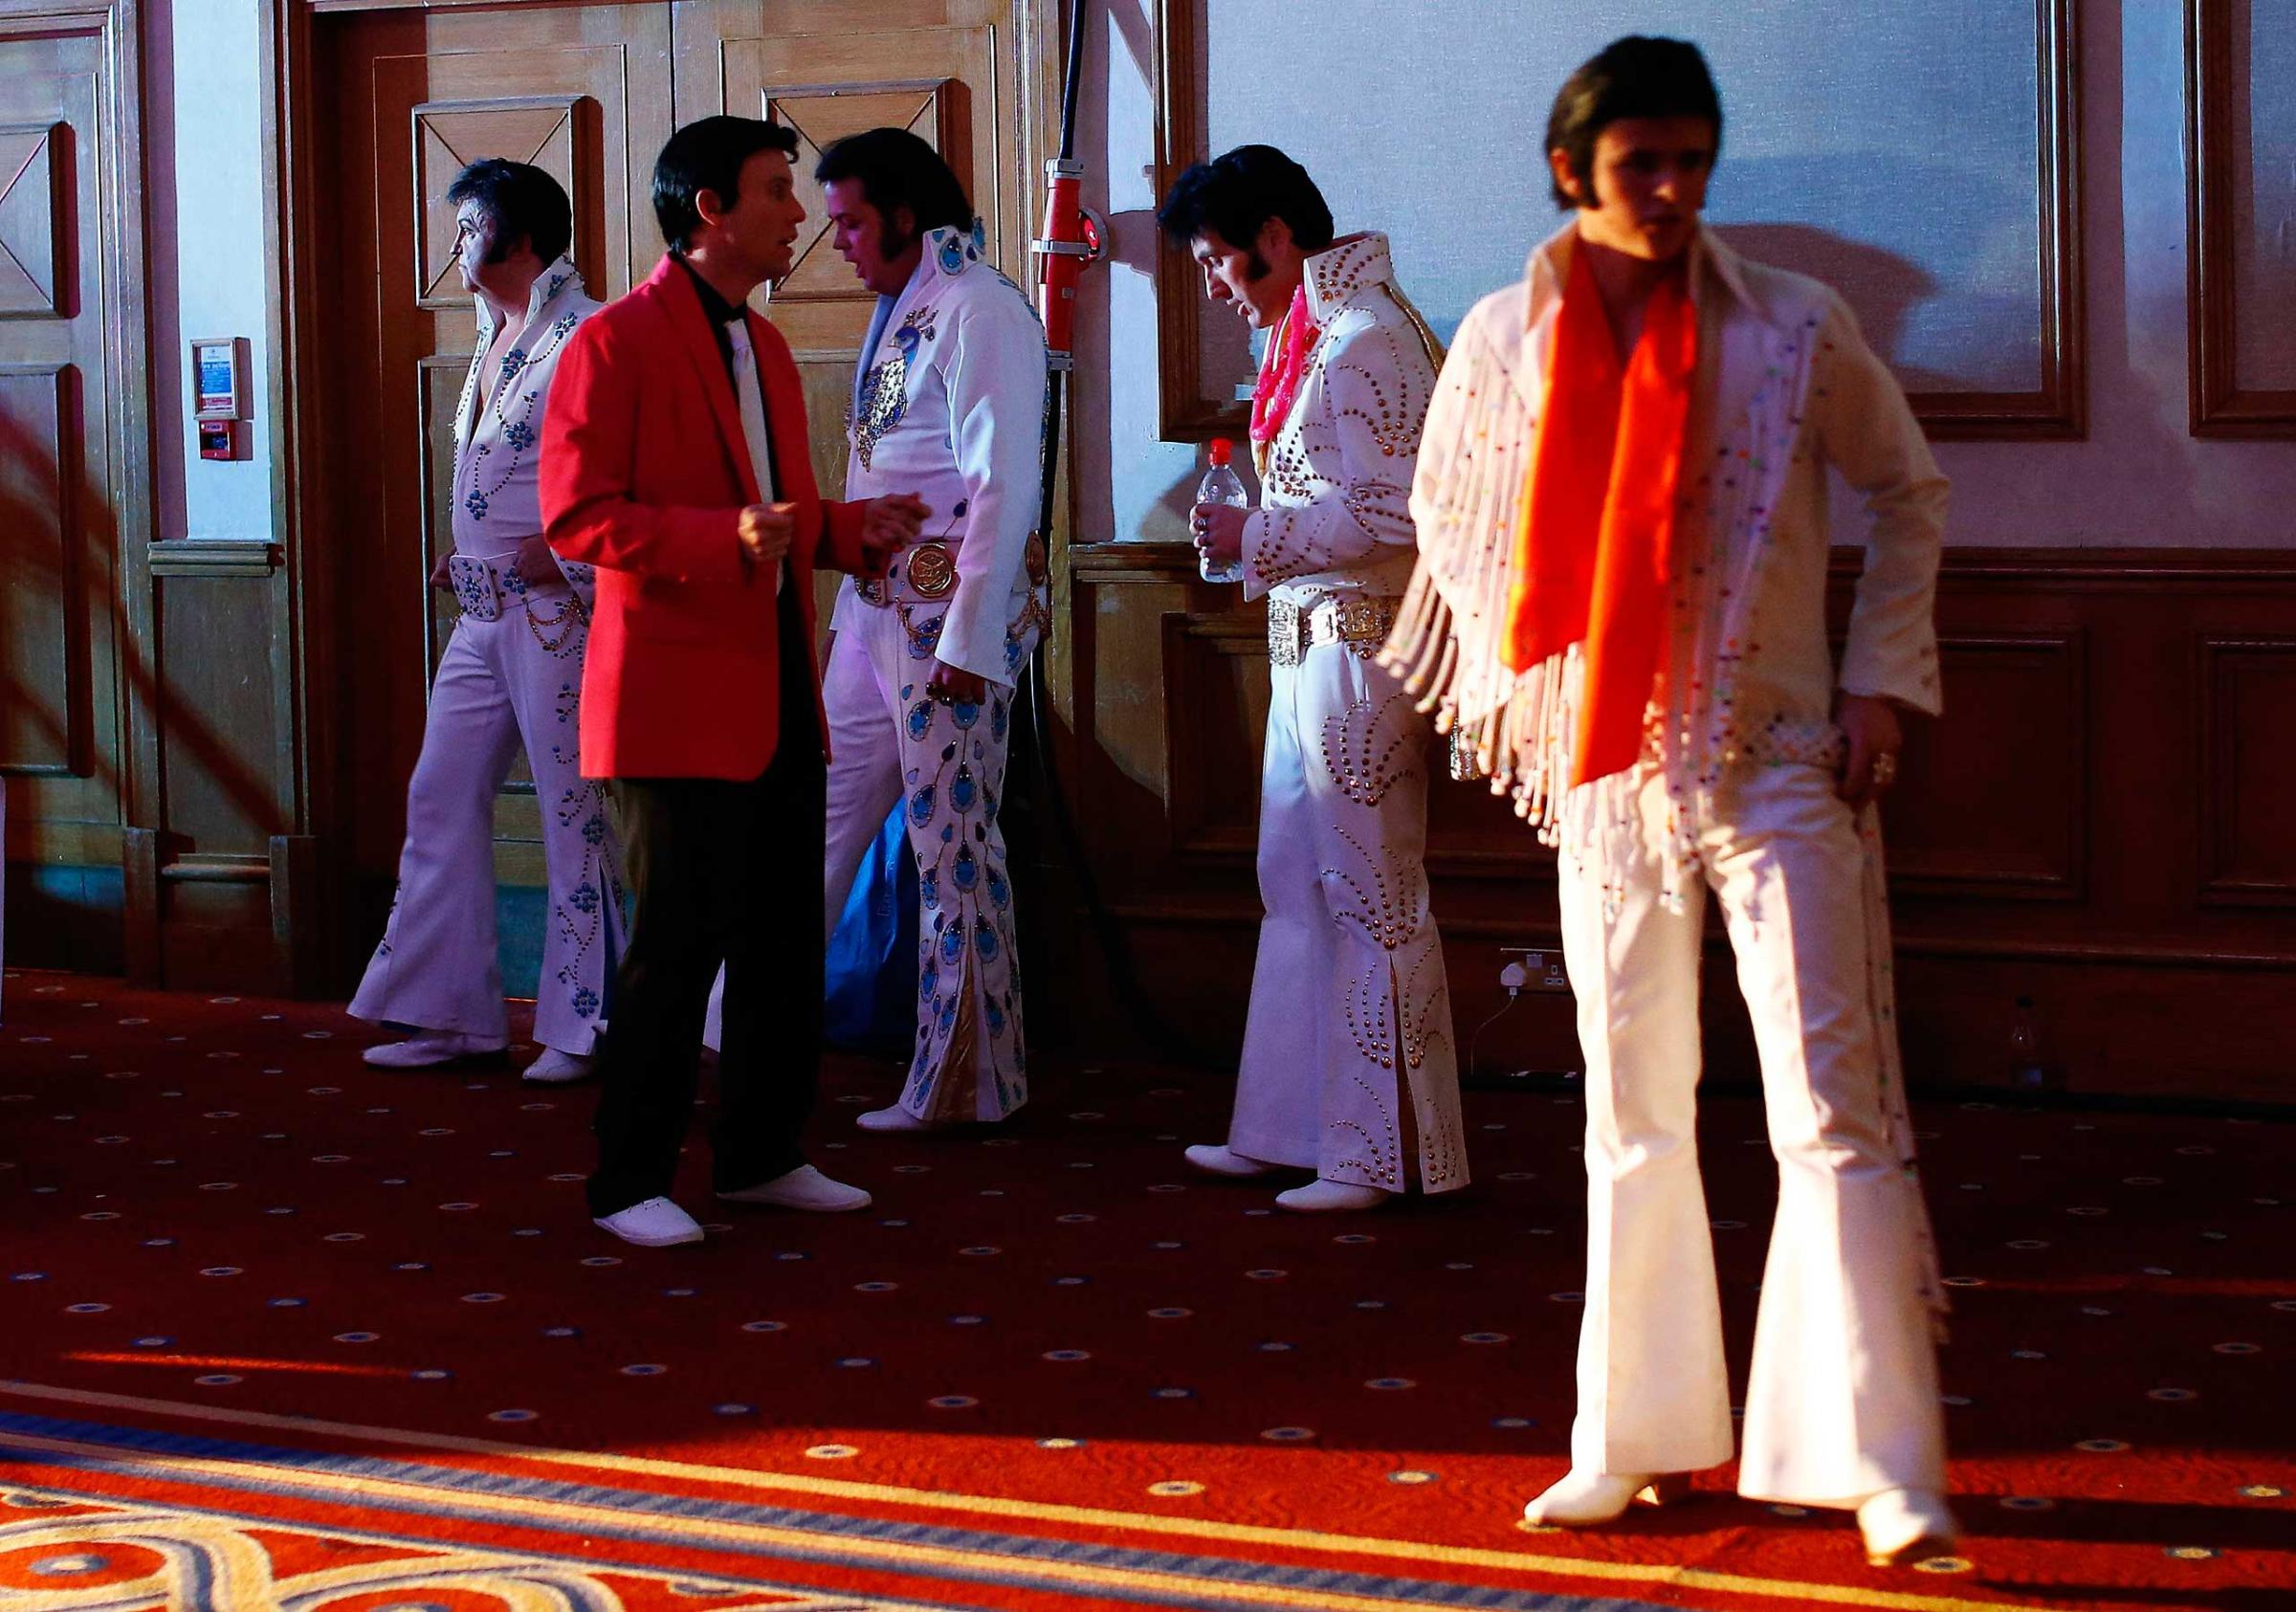 Jan. 4, 2015. Finalists wait backstage before their performances during the annual European Elvis Tribute Artist Contest and Convention in Birmingham, England.